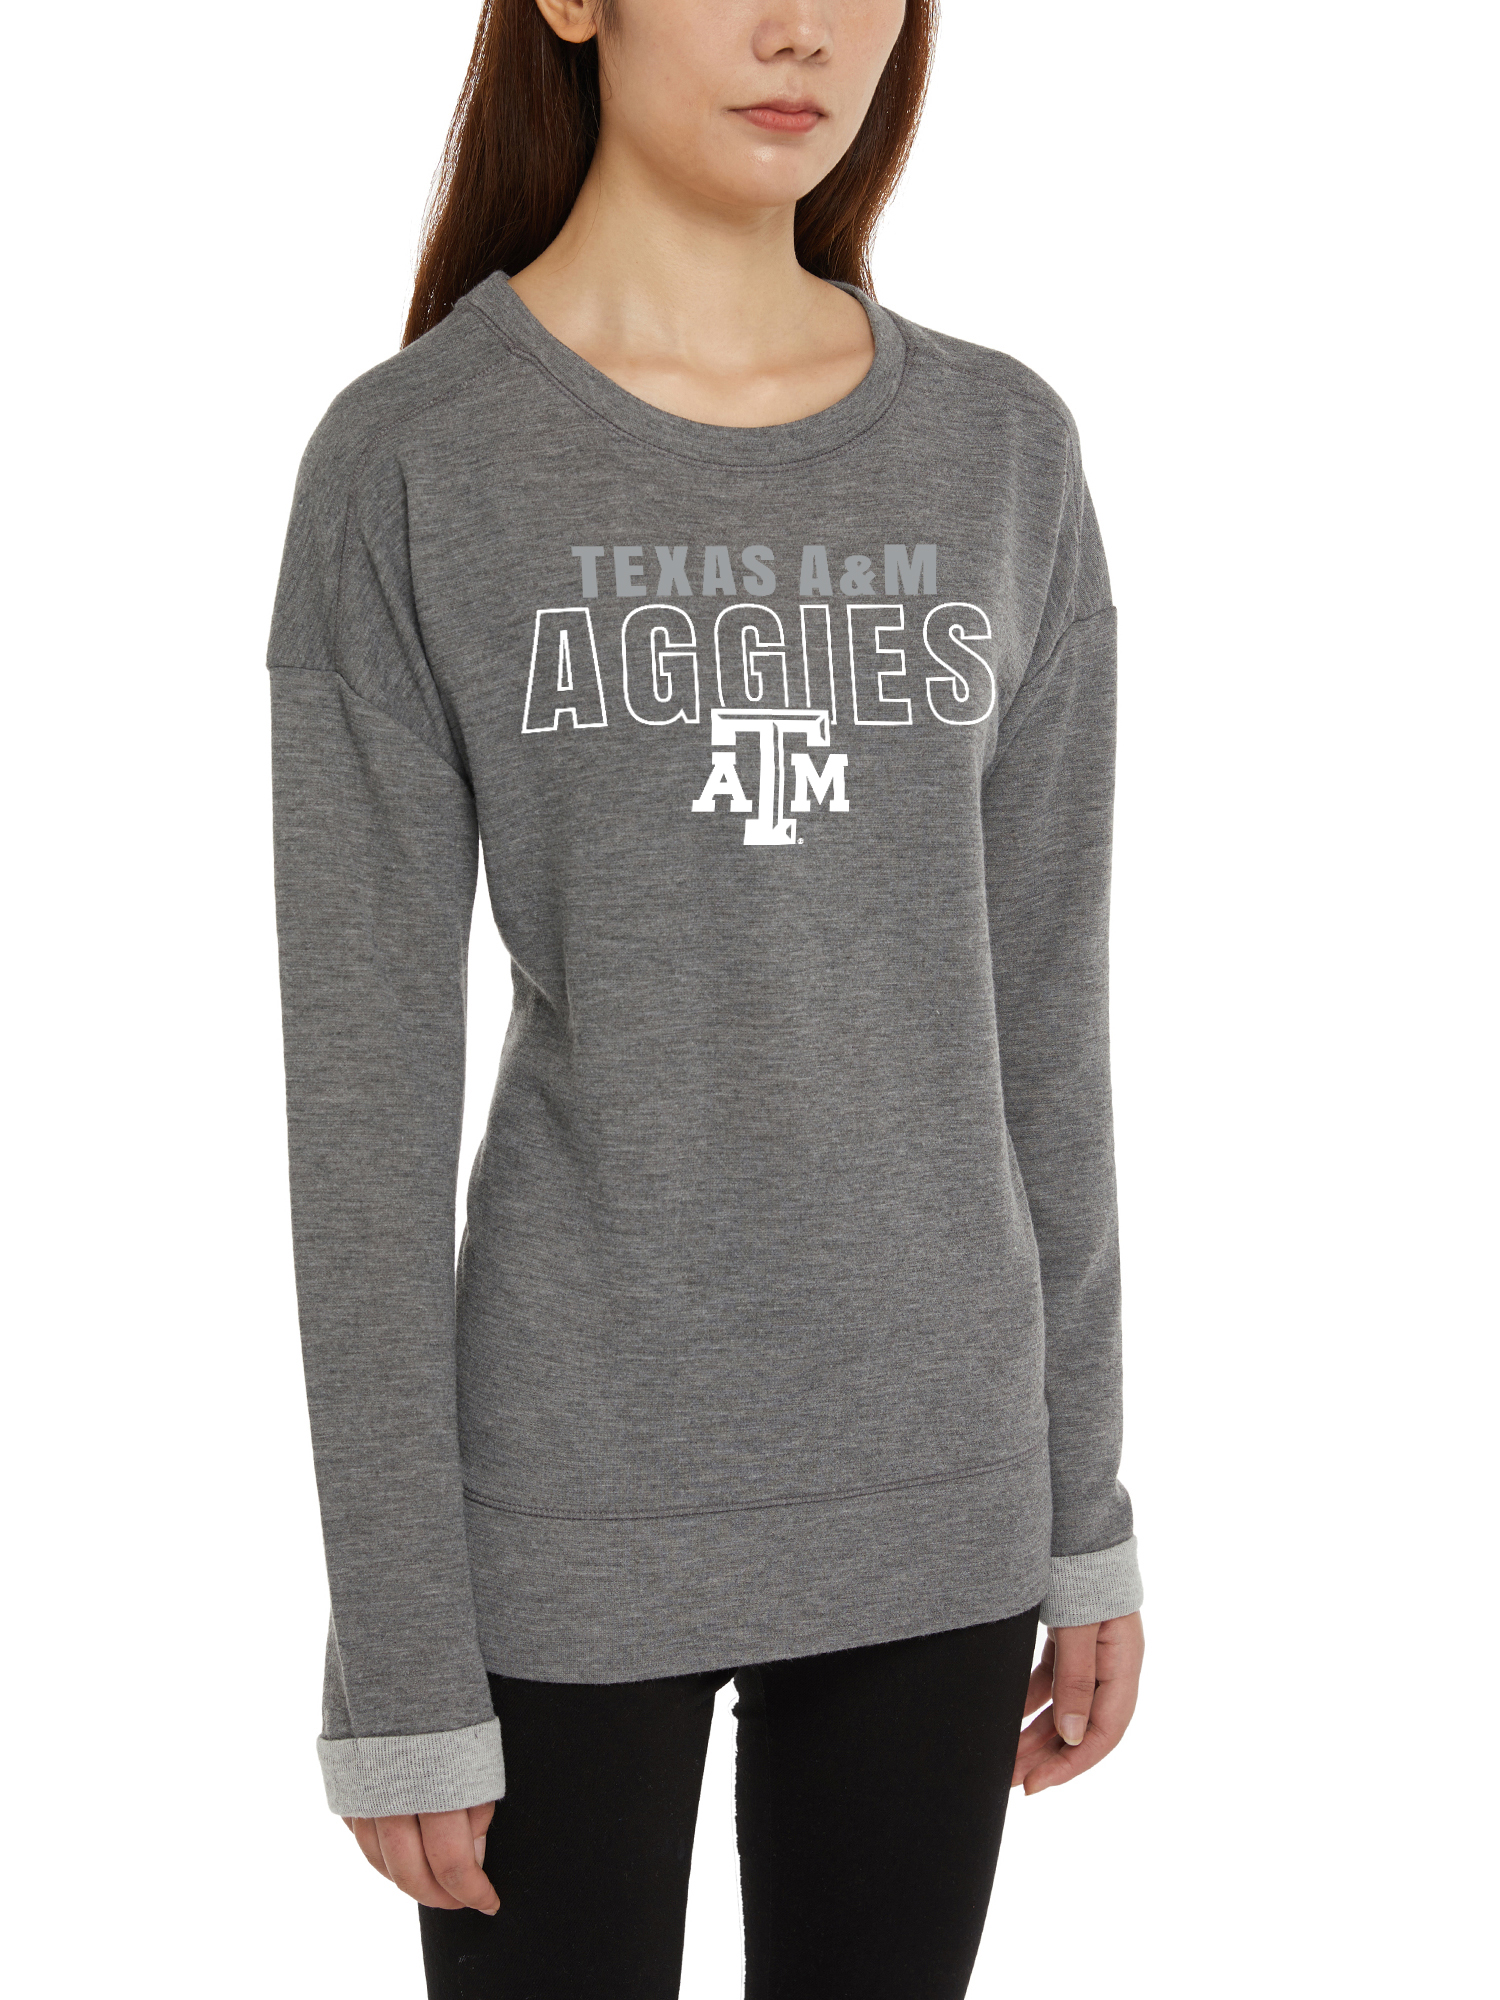 Texas A&M Aggies Ladies LS Top - image 2 of 2